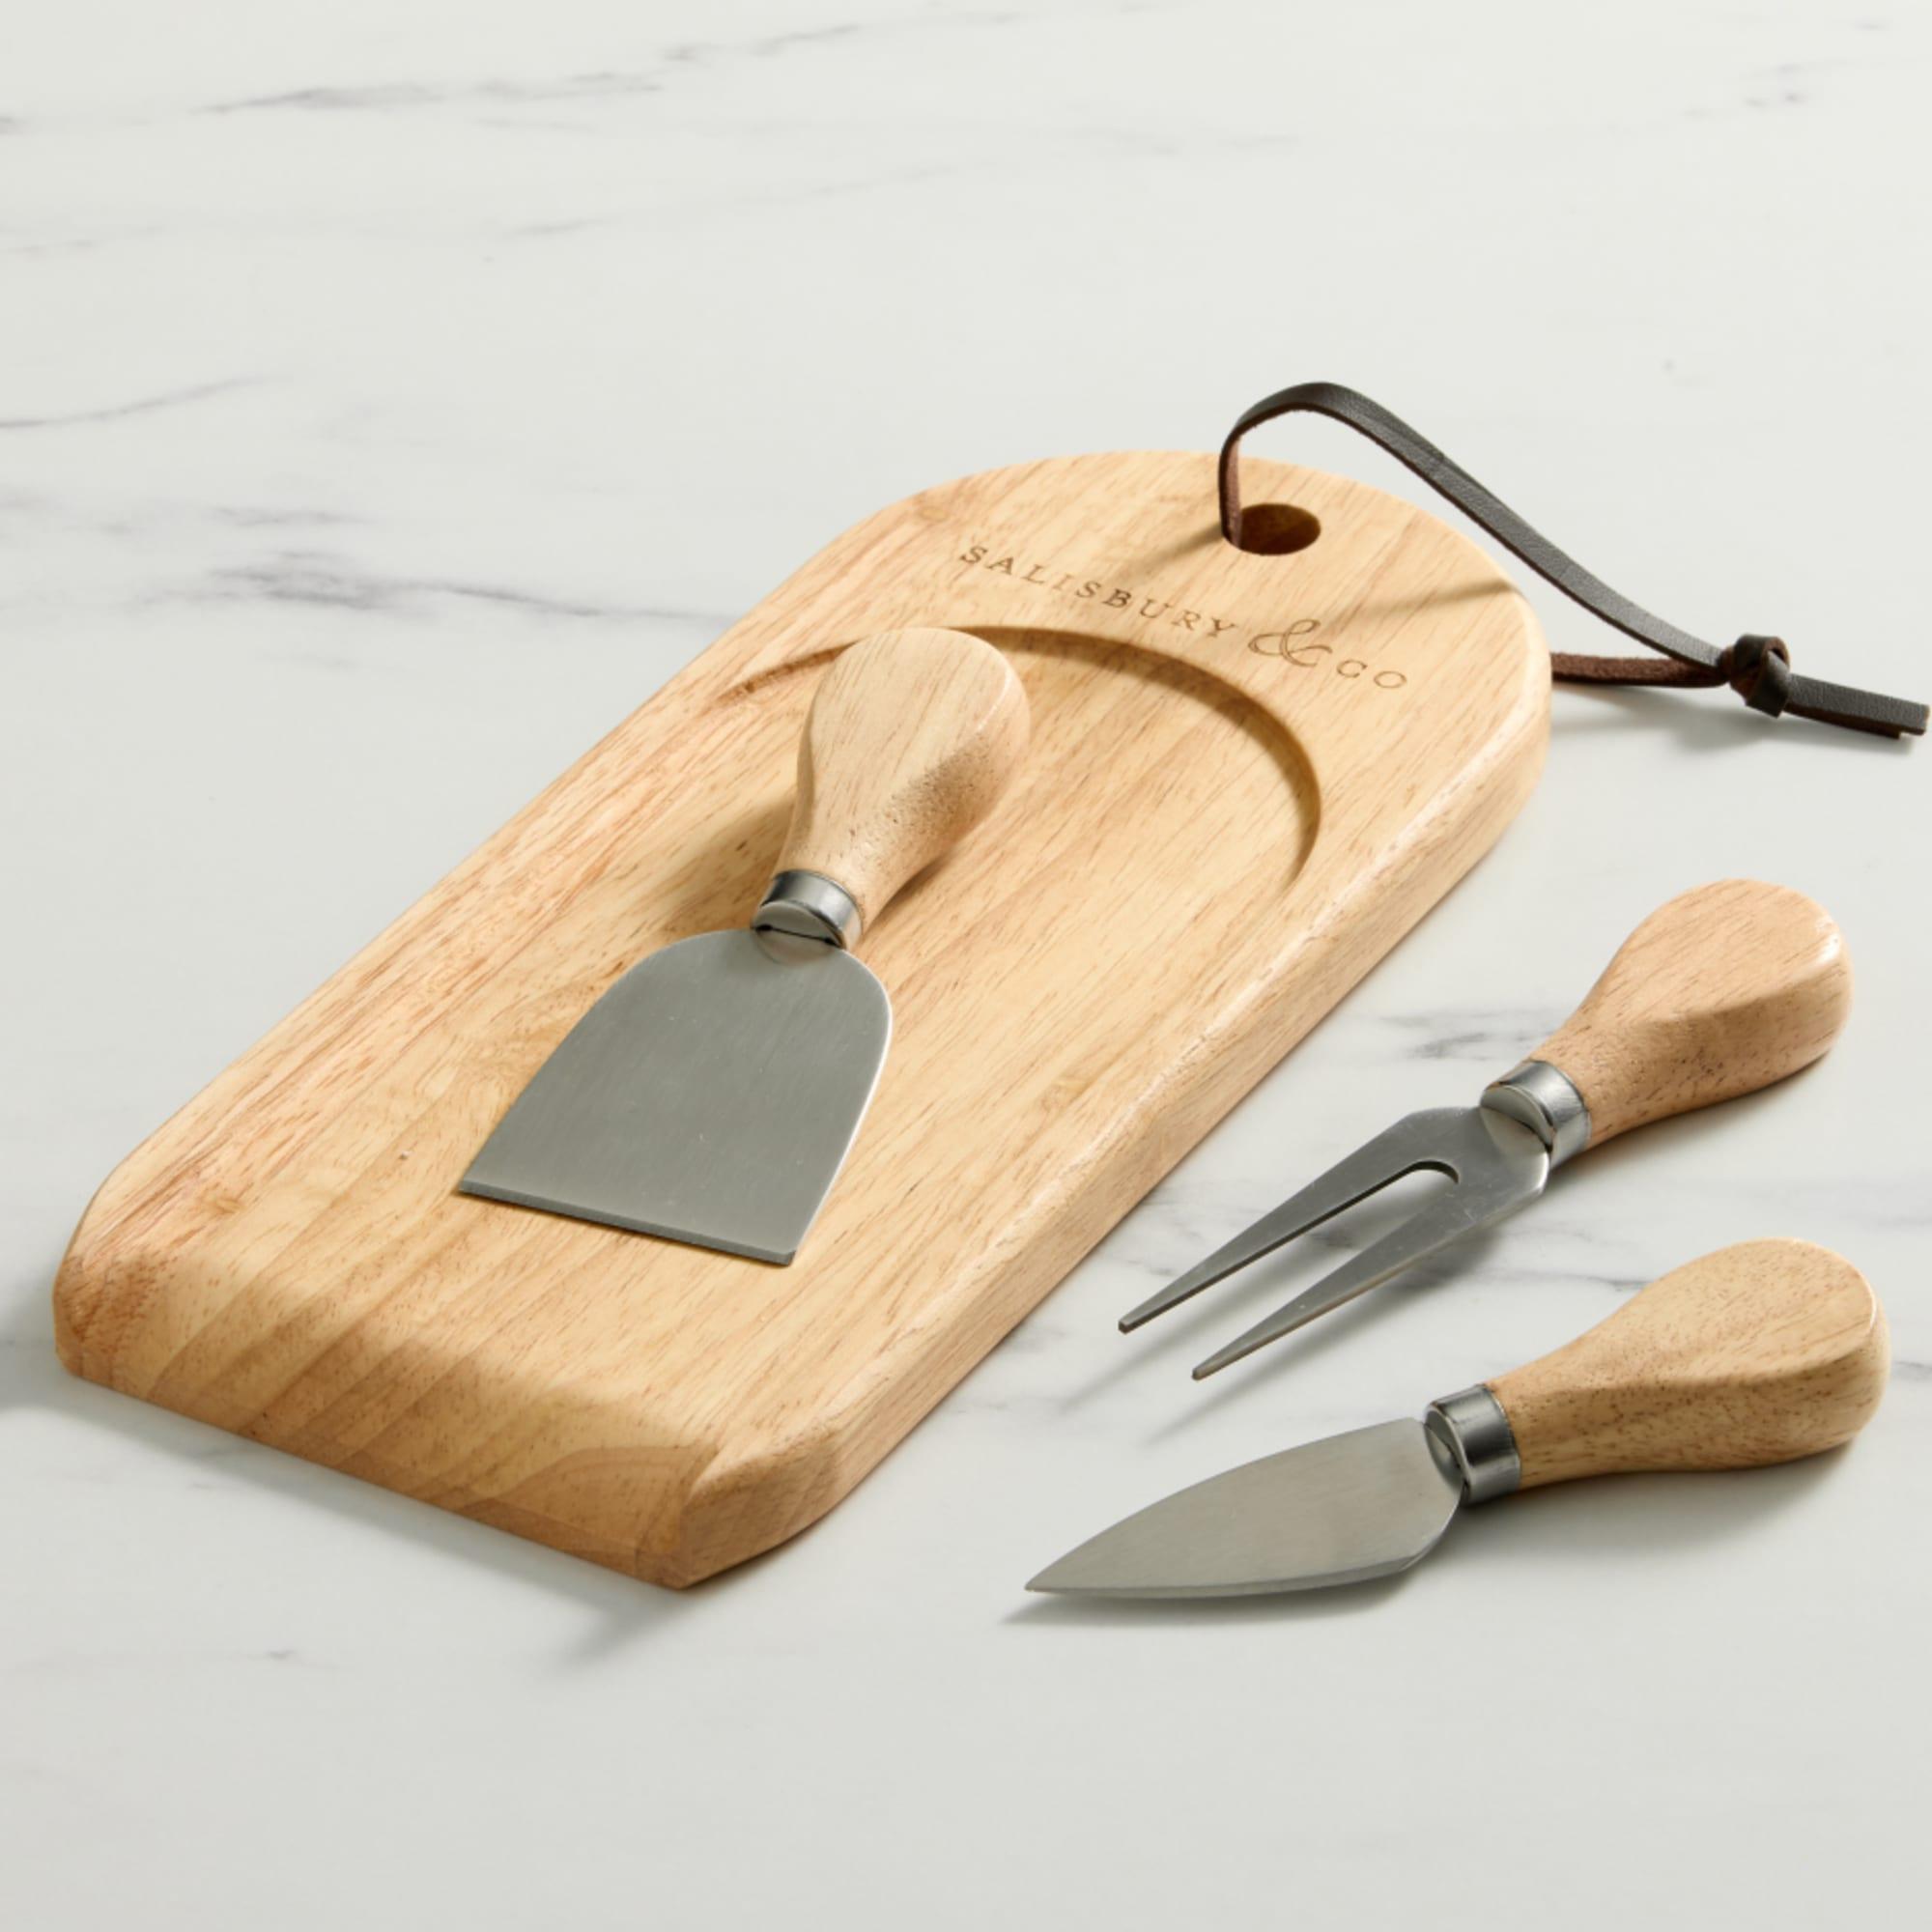 Salisbury & Co Degustation Tasting Cheese Board with Knife Set 4pc Natural Image 5